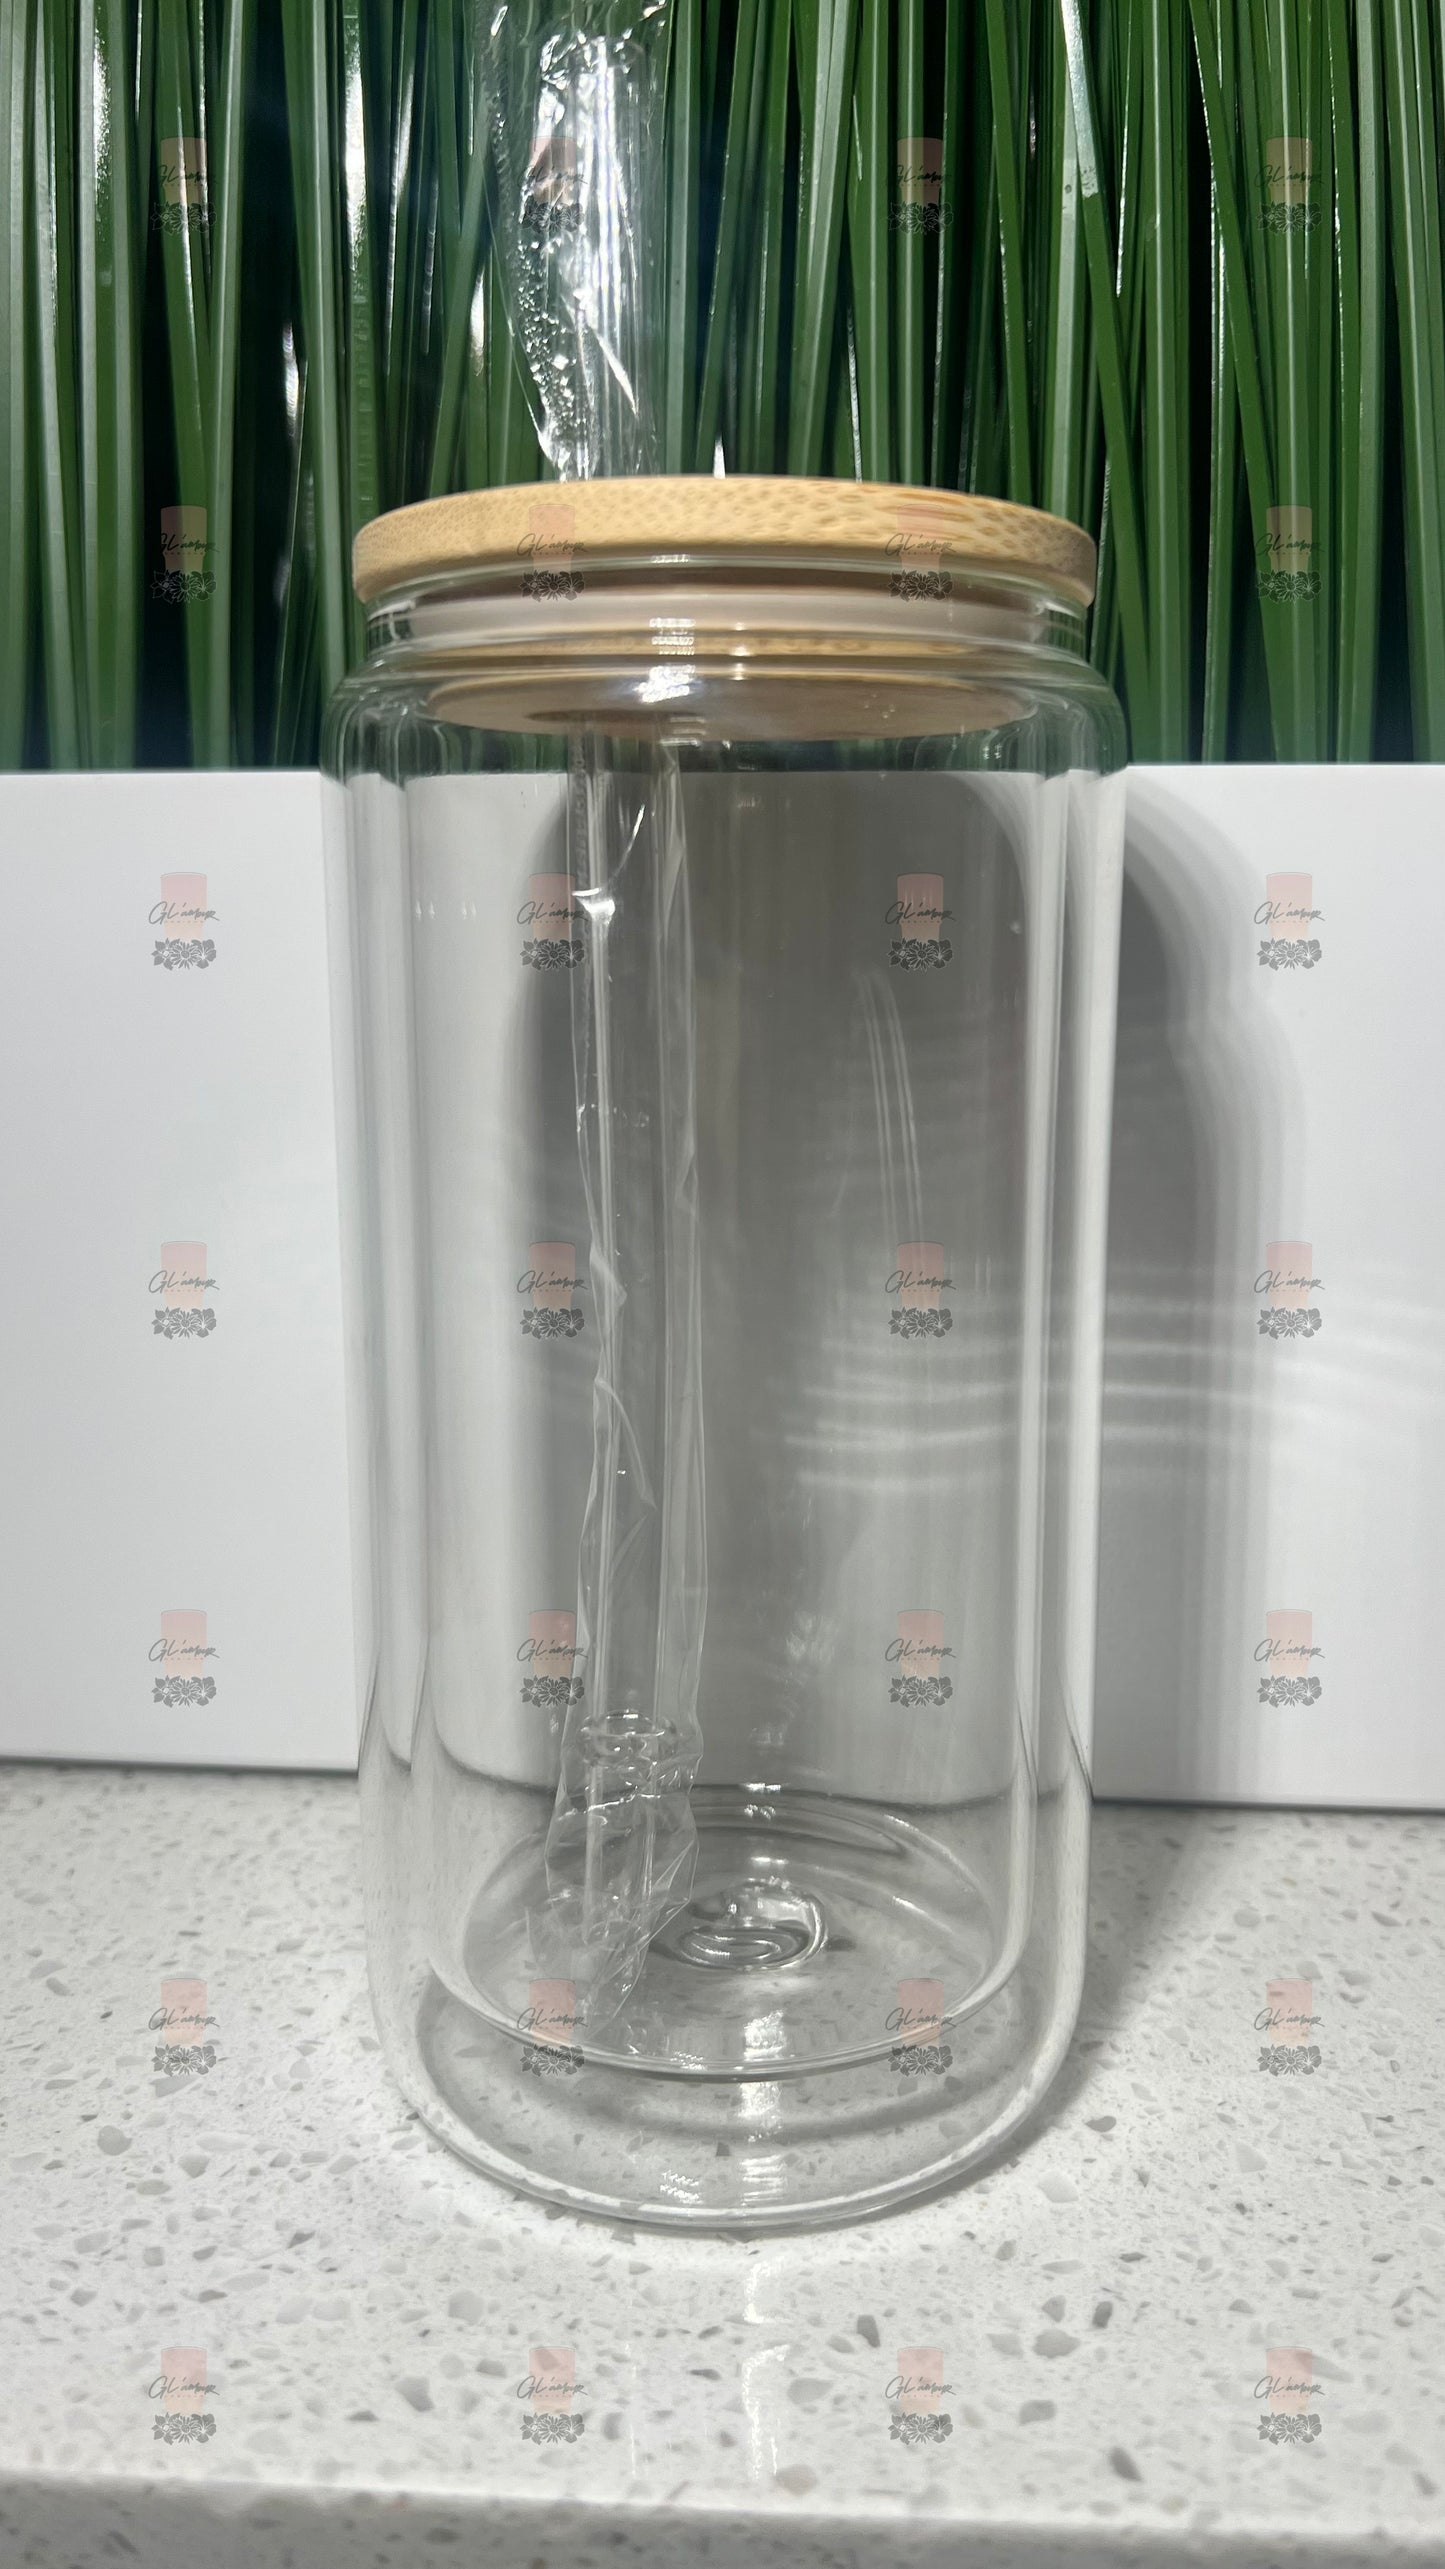 12 oz Double Wall Glass Cans with Bamboo Lid Plastic Straw - 3MM Hole